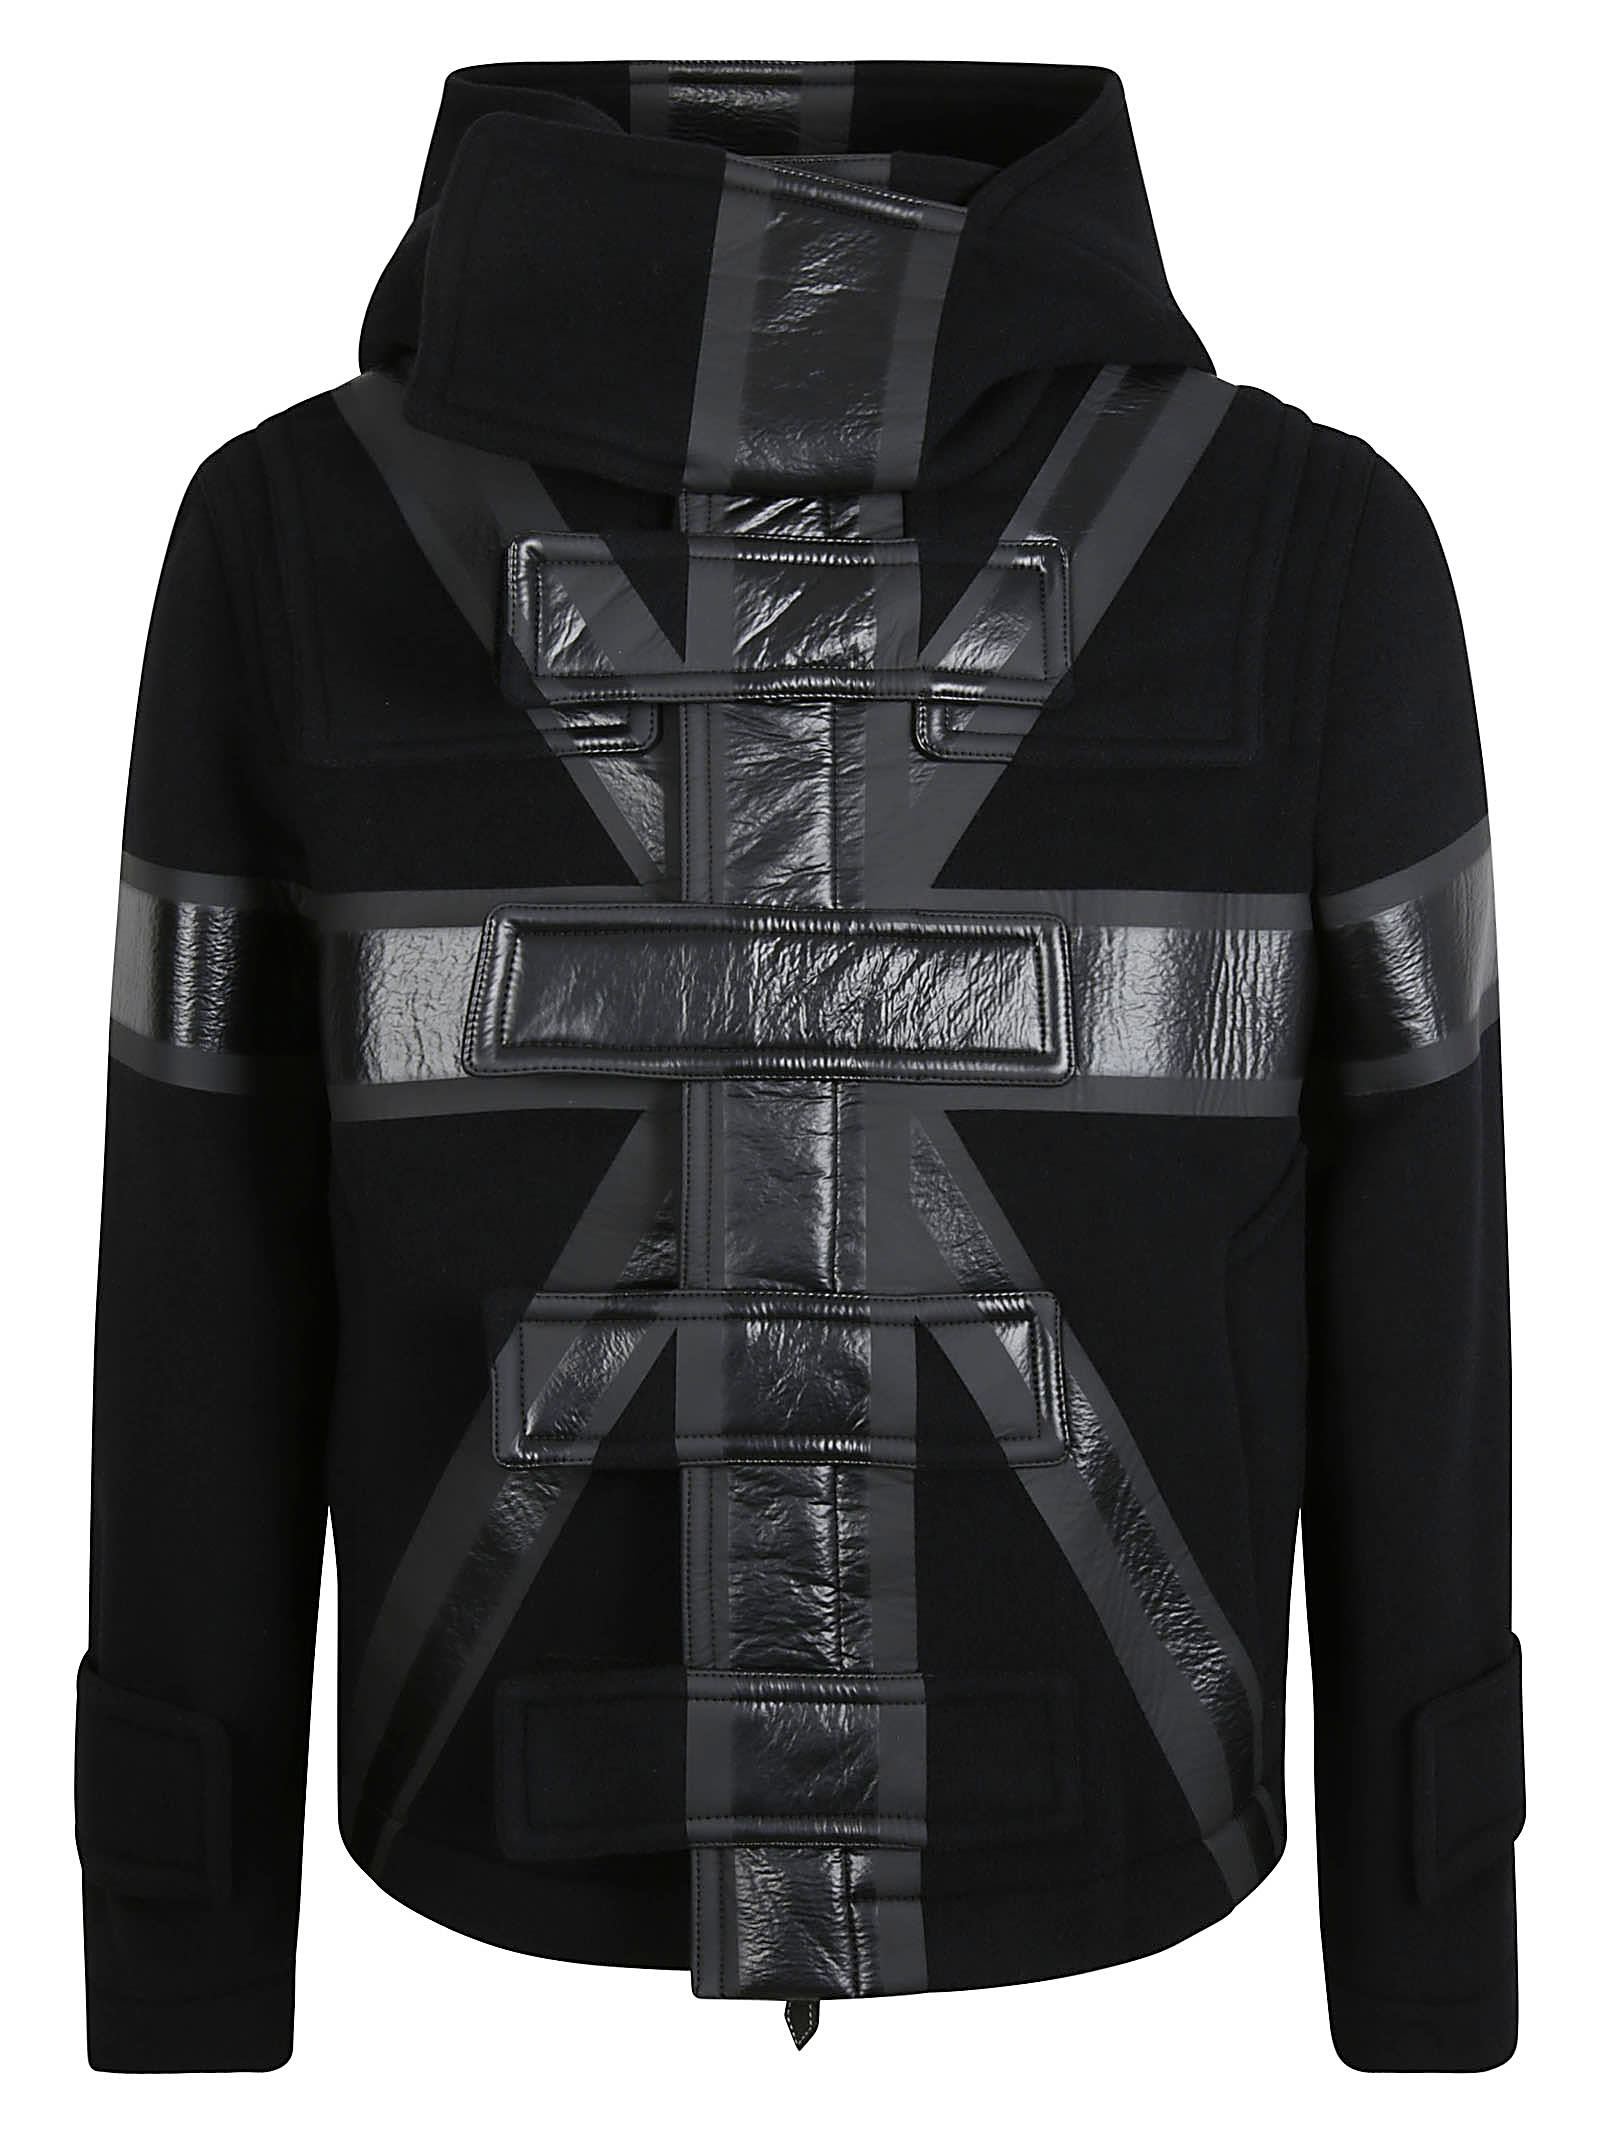 Burberry Cross Tape Patterned Hooded Sweater